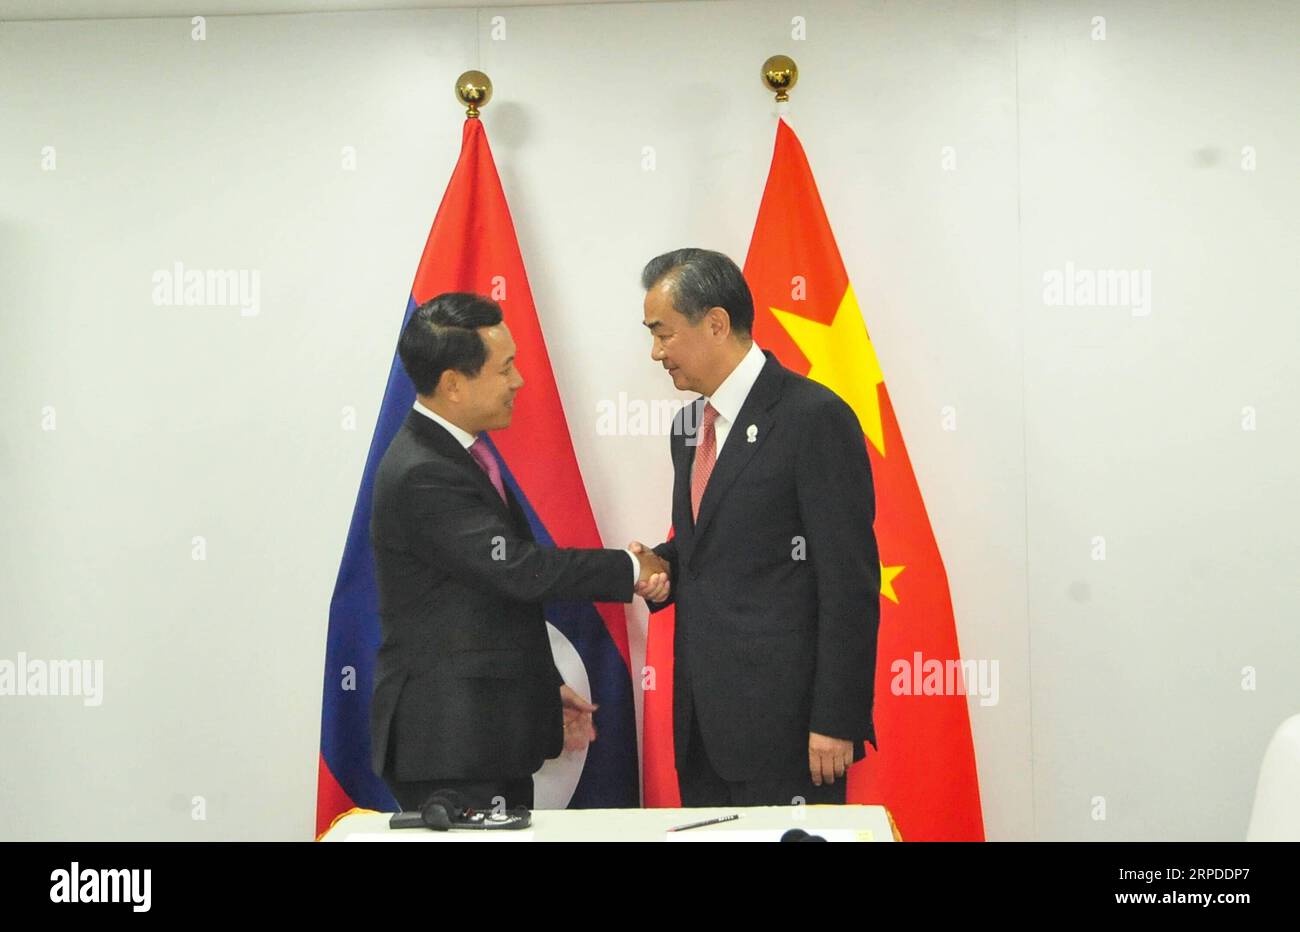 (190731) -- BANGKOK, July 31, 2019 (Xinhua) -- Chinese State Councilor and Foreign Minister Wang Yi (R) meets with Lao Foreign Minister Saleumxay Kommasith in Bangkok, Thailand, on July 31, 2019. (Xinhua/Rachen Sageamsak) THAILAND-BANGKOK-CHINA-LAOS-FM-MEETING PUBLICATIONxNOTxINxCHN Stock Photo